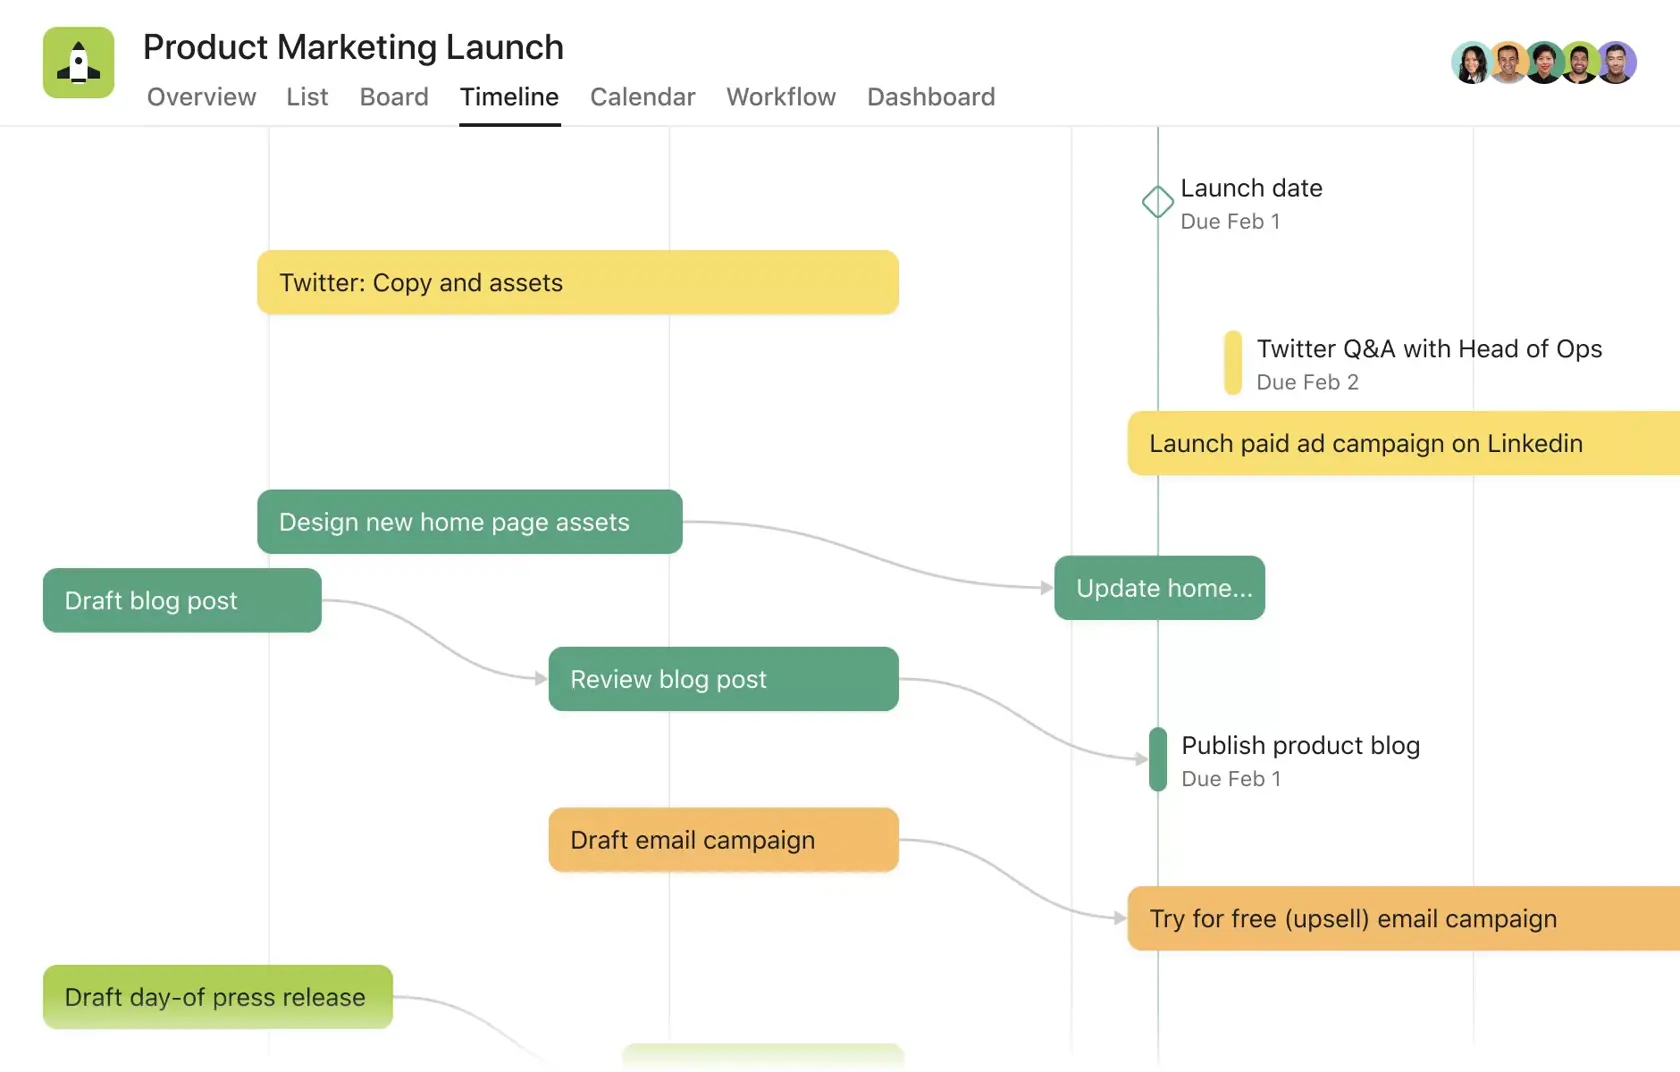 [Product UI] Product marketing launch project example (Timeline)